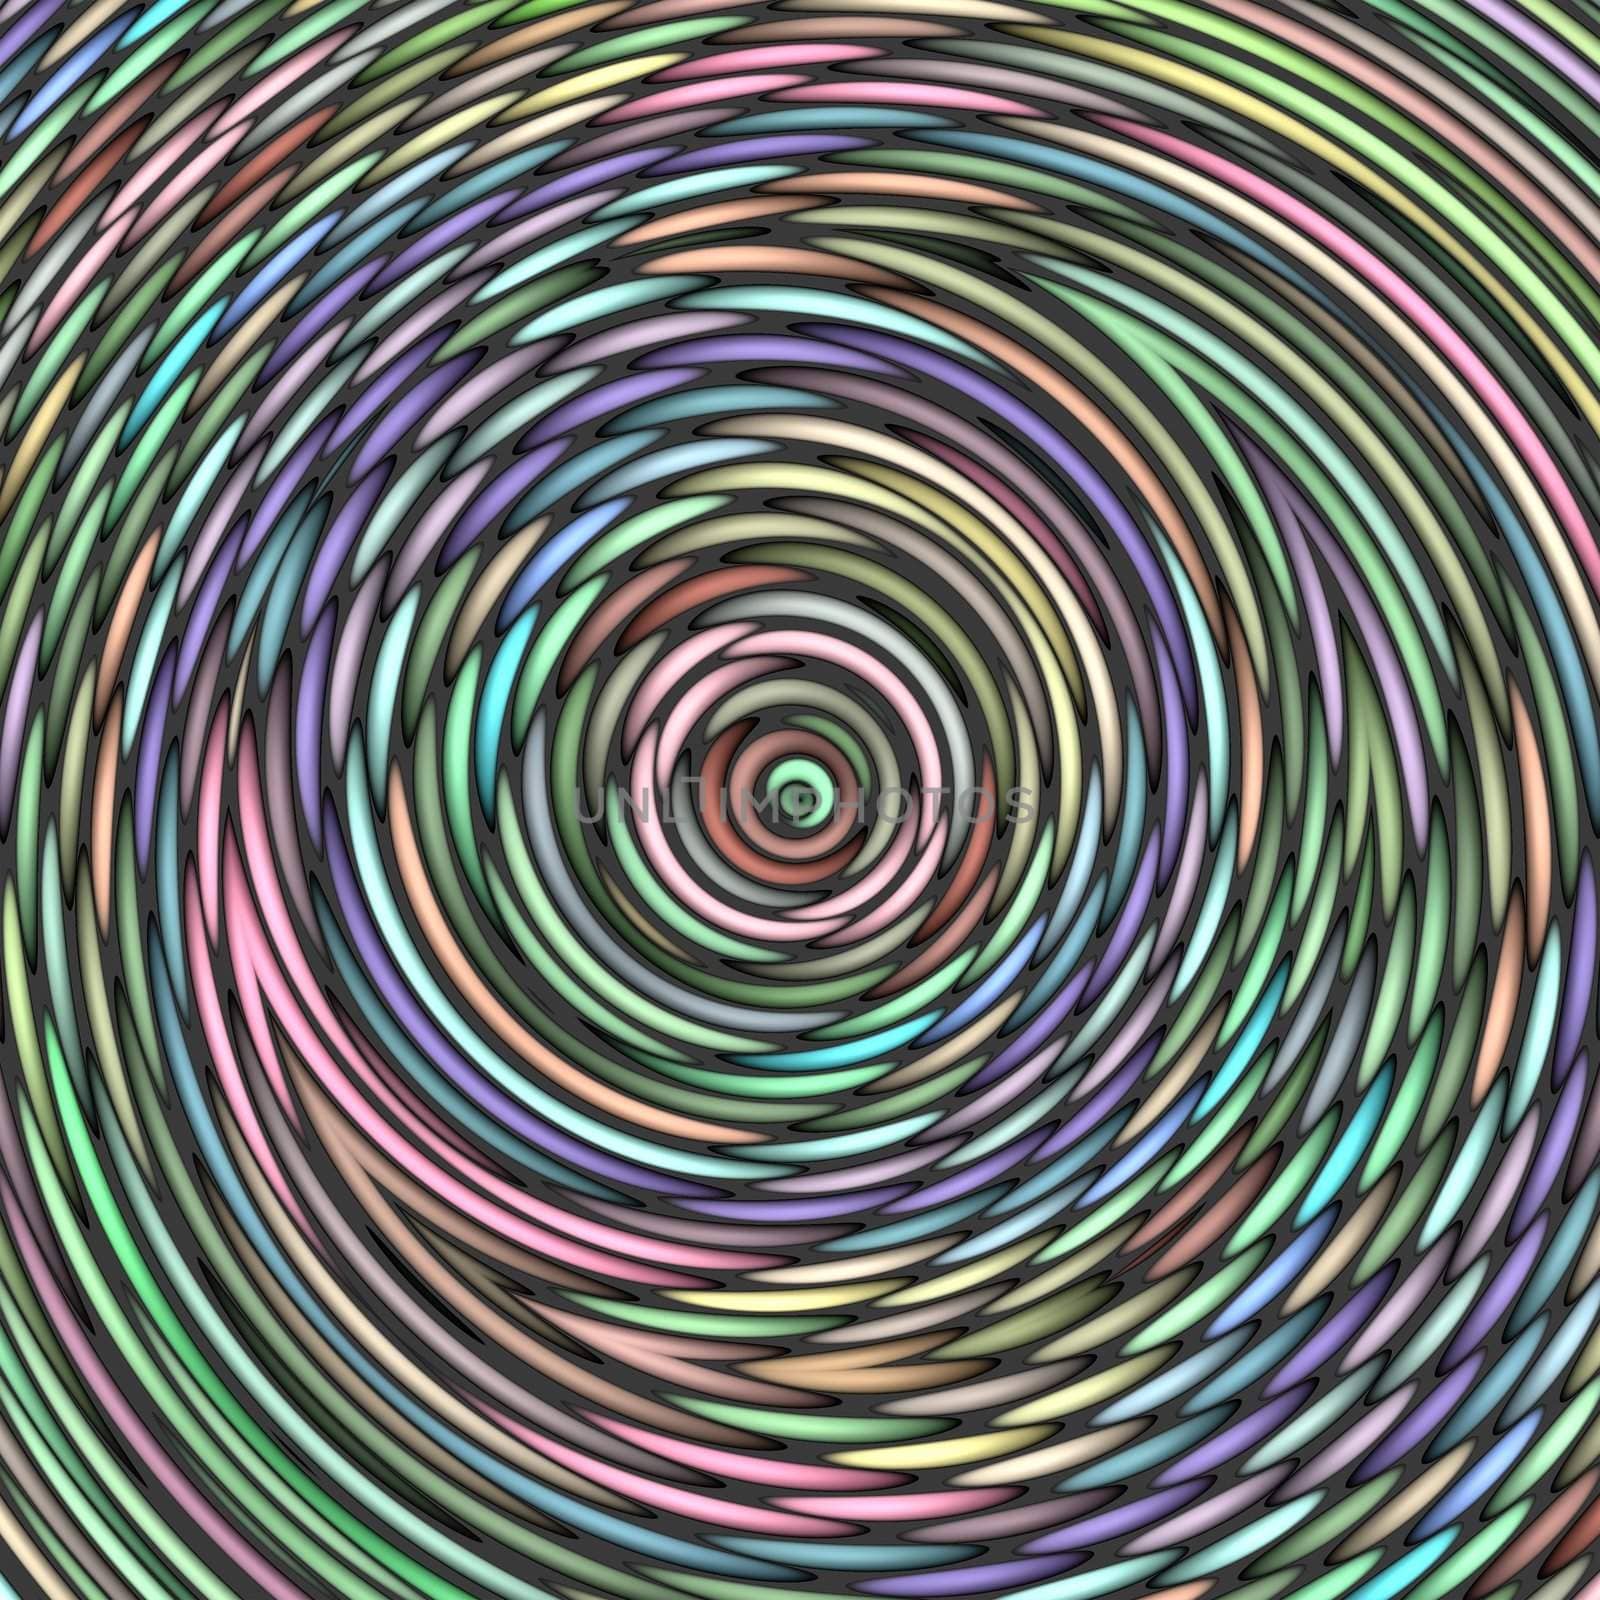 abstract texture of concentric rings in various colors